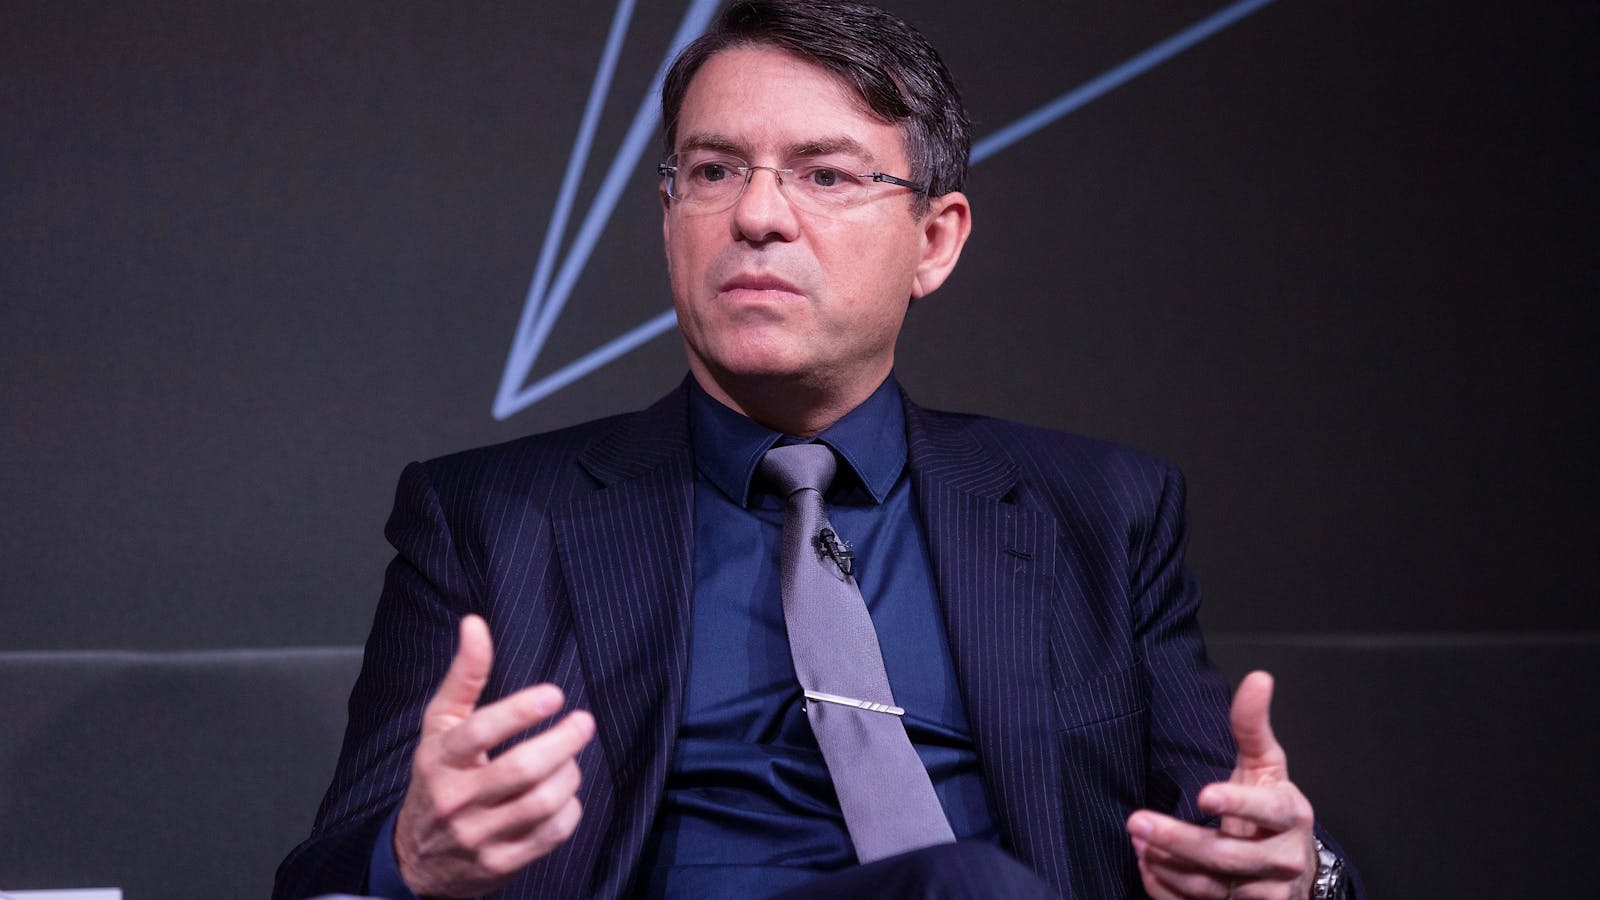 Symphony CEO David Gurle. Photo by Bloomberg.